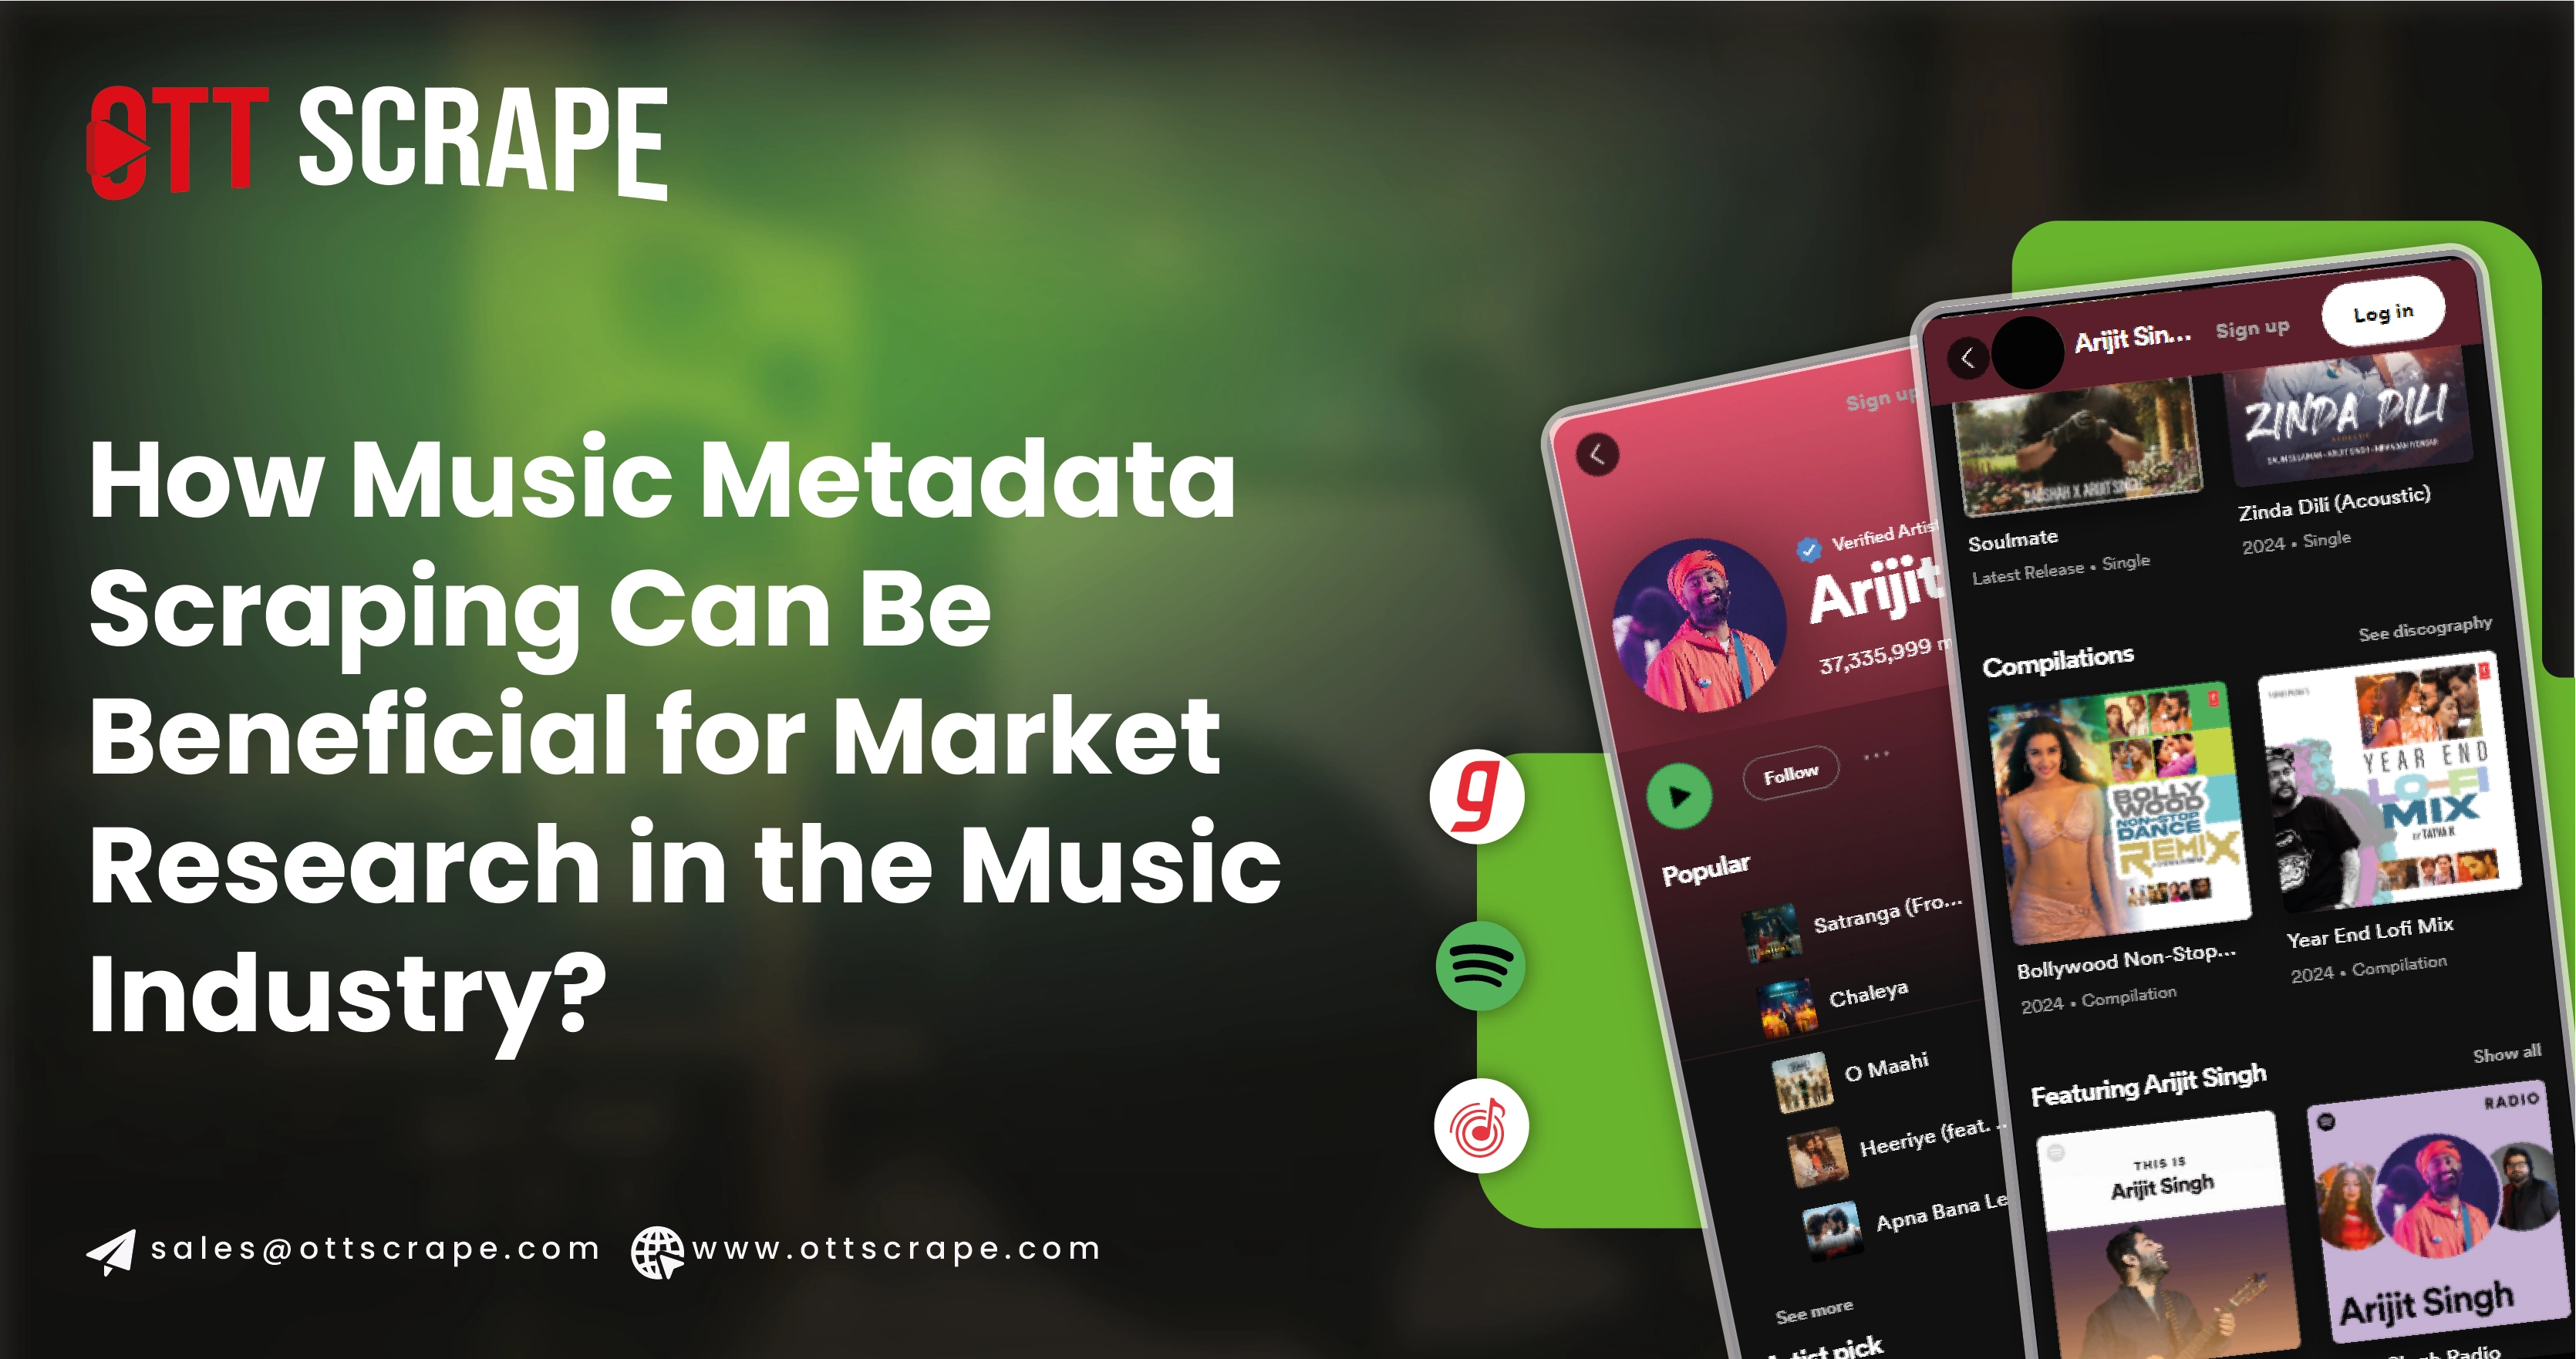 How-Music-Metadata-Scraping-Can-Be-Beneficial-for-Market-Research-in-the-Music-Industry-01